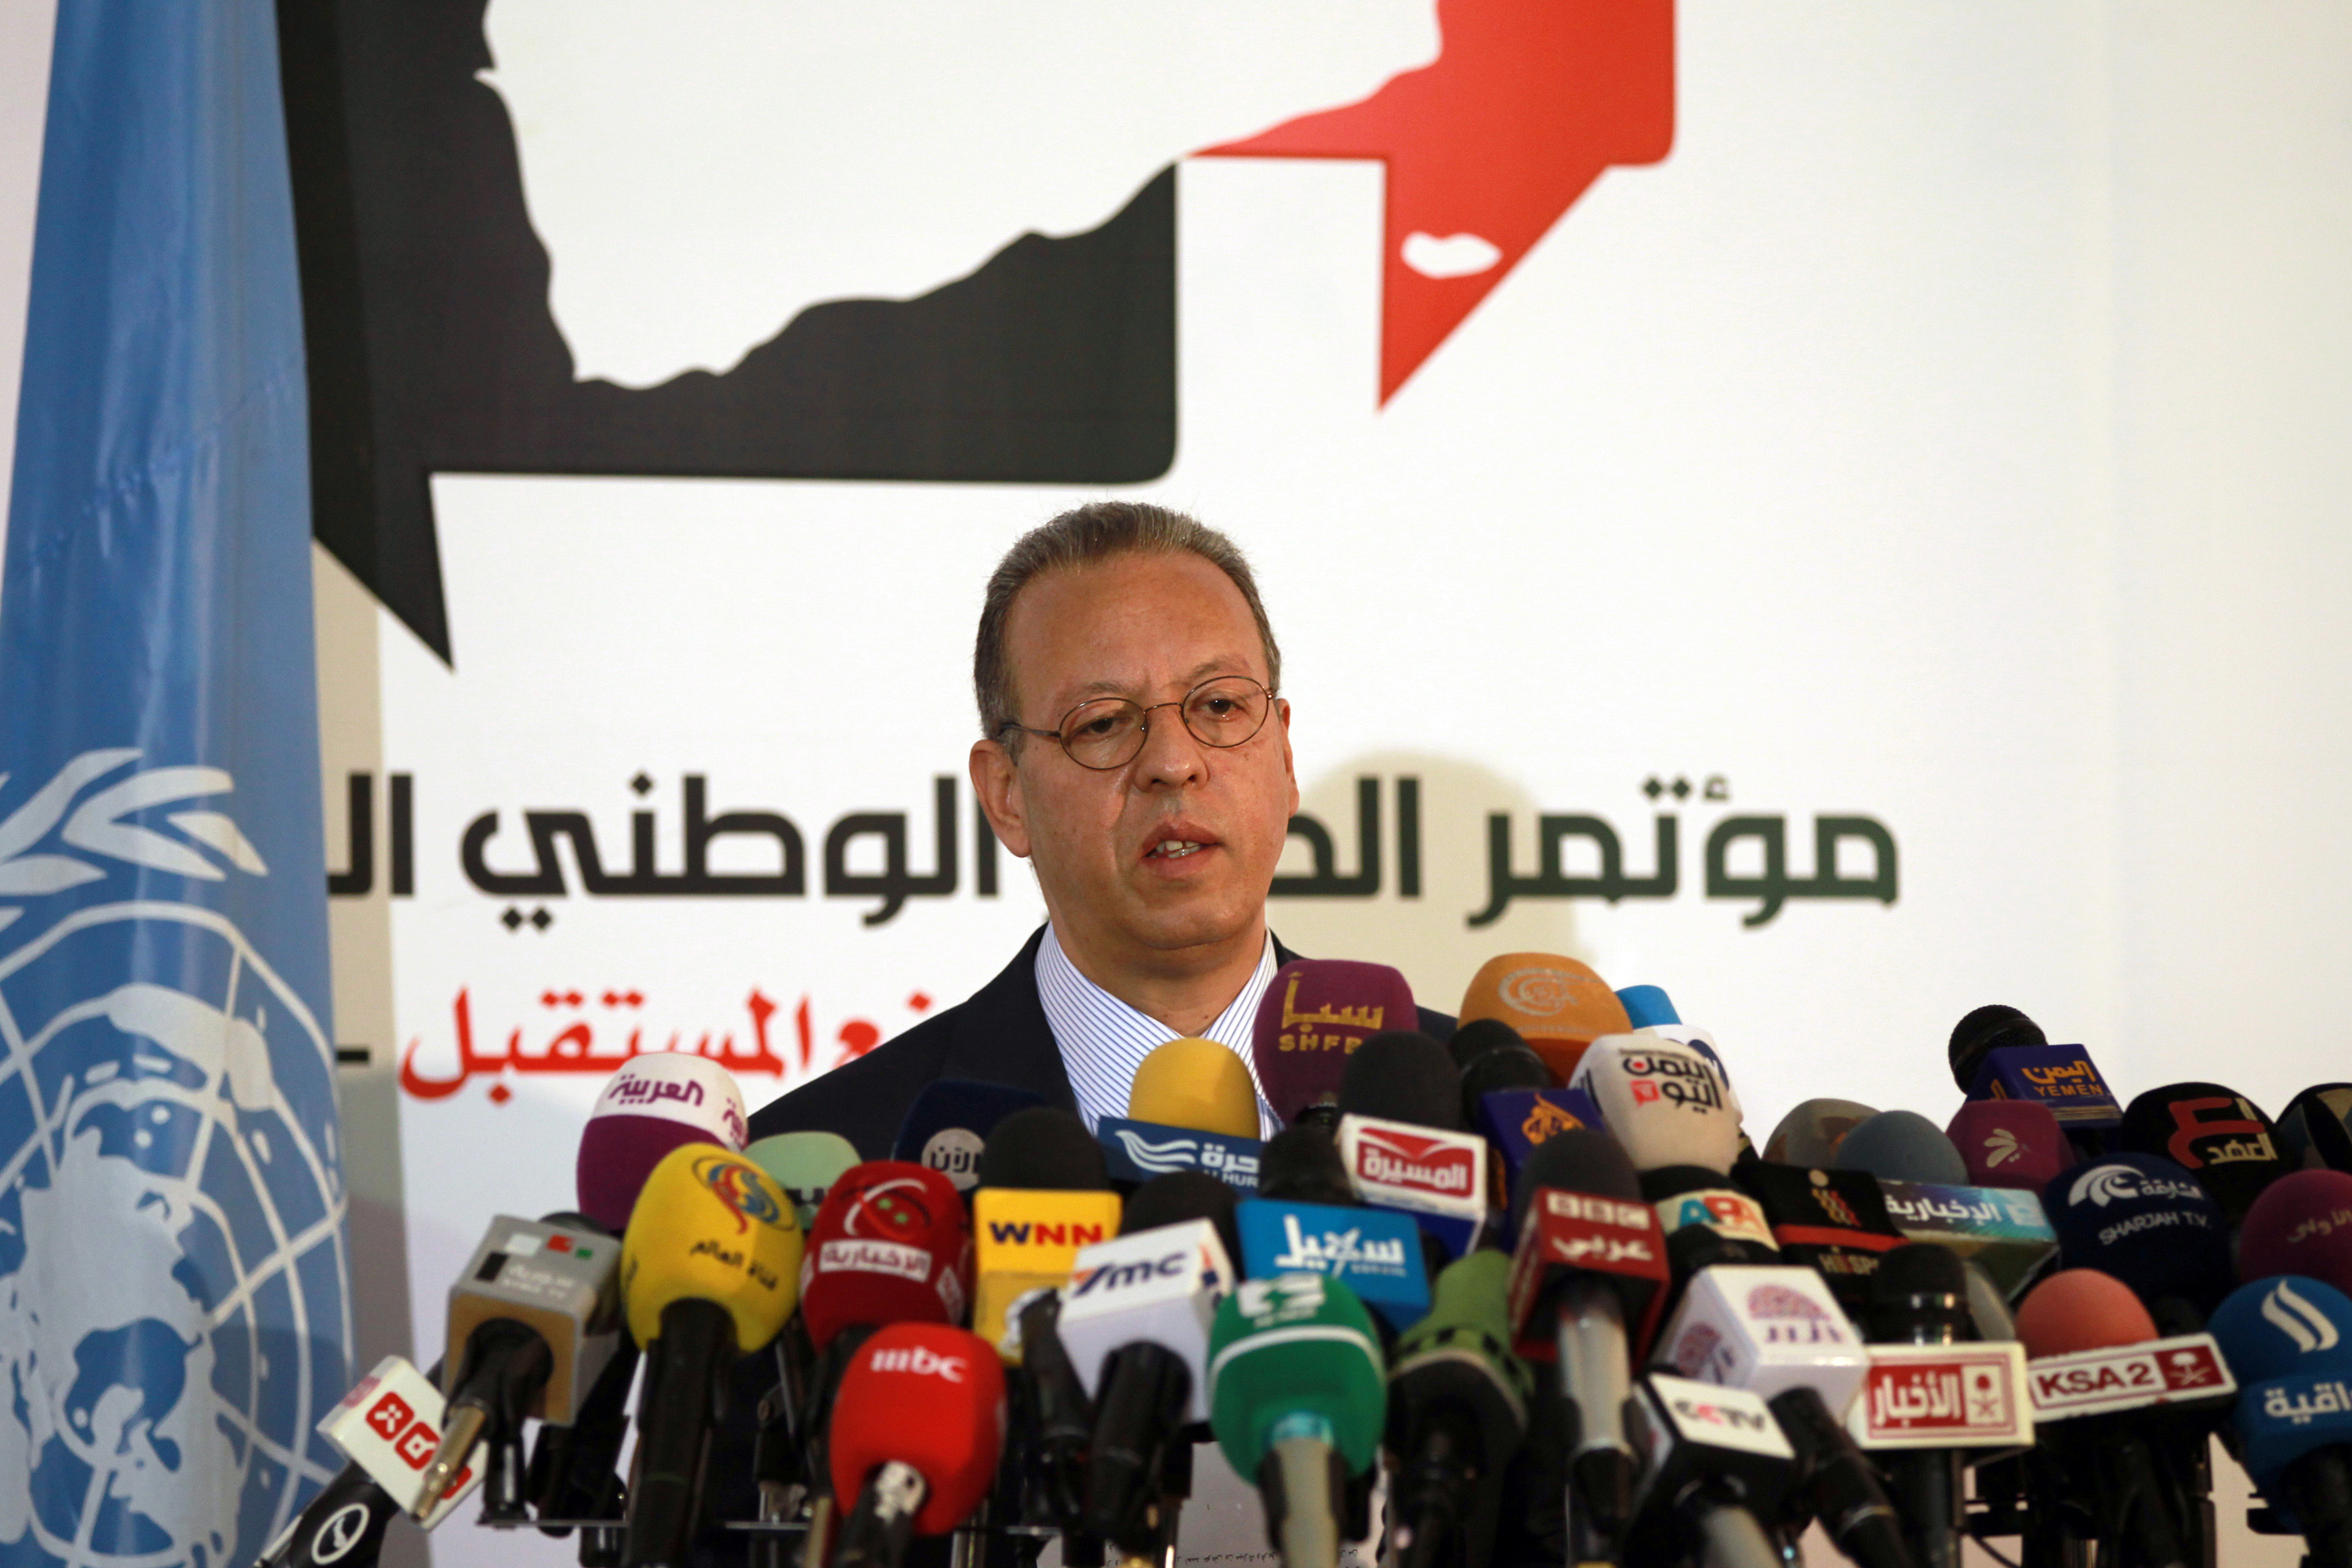 Jamal Benomar, UN envoy to Yemen, speaks during a press conference conference in Sanaa December 24, 2013. (MOHAMMED HUWAIS—AFP/Getty Images)